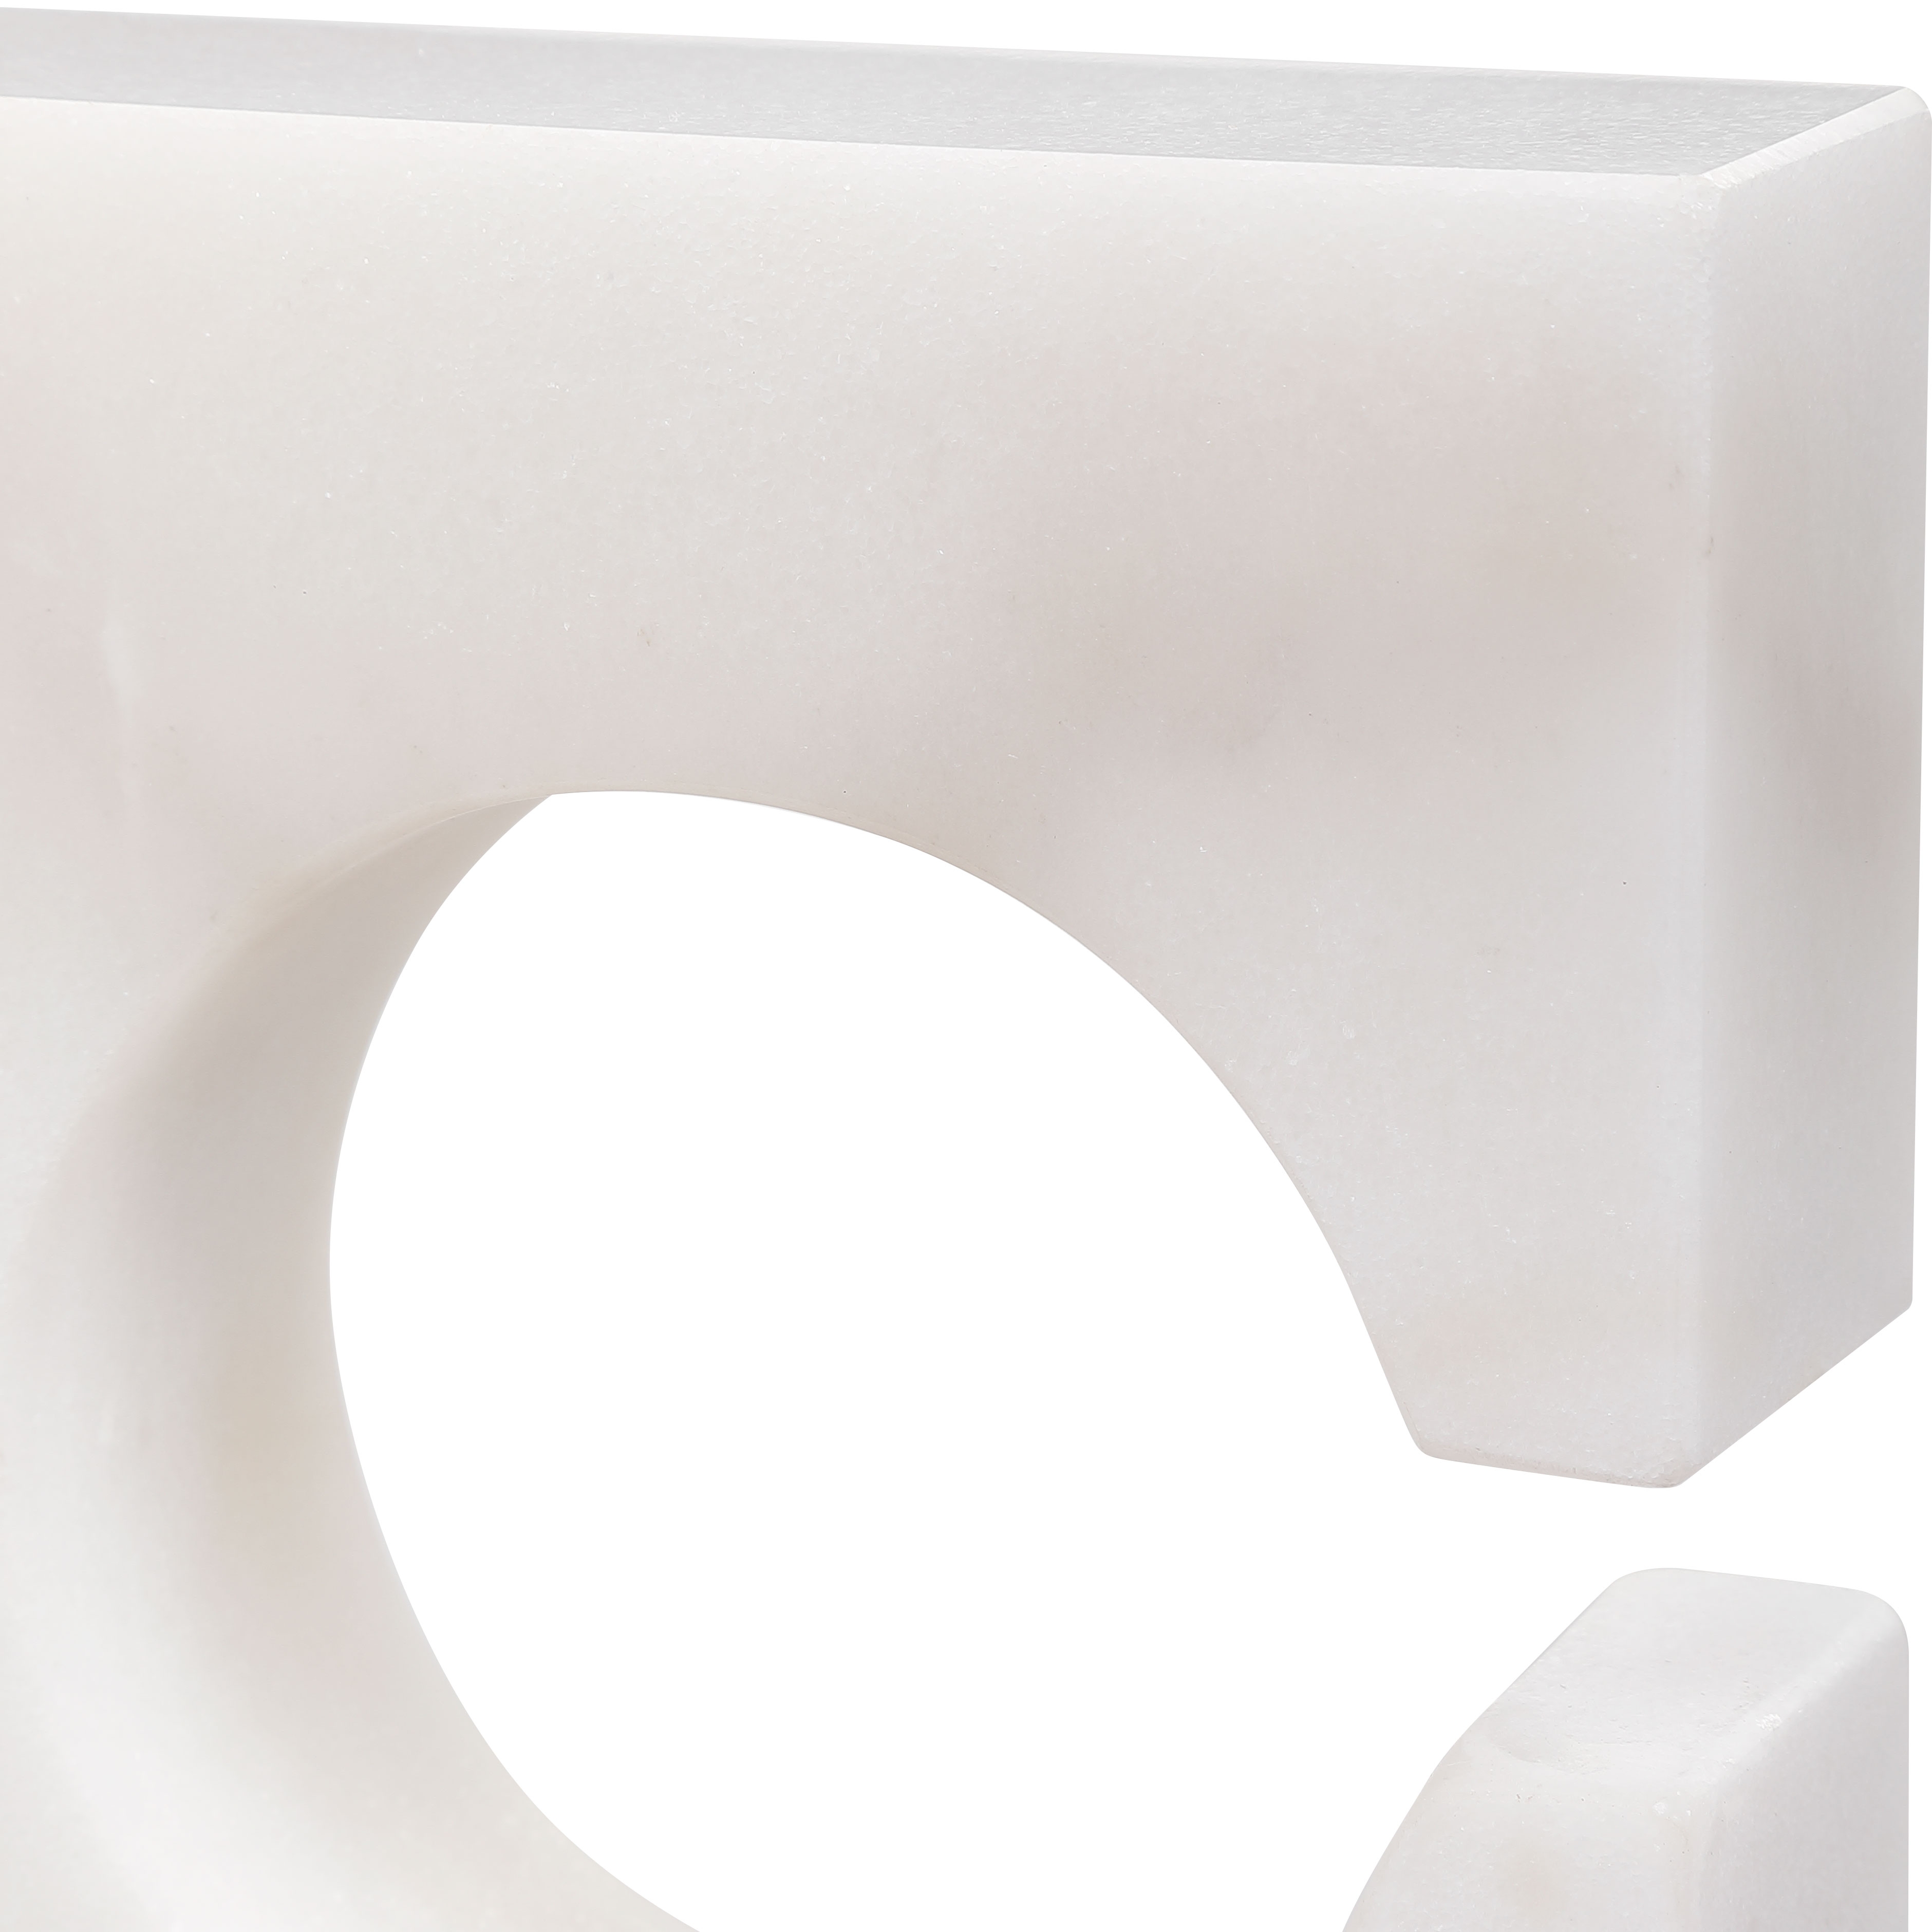 Clarin White & Gray Bookends, S/2 - Image 2